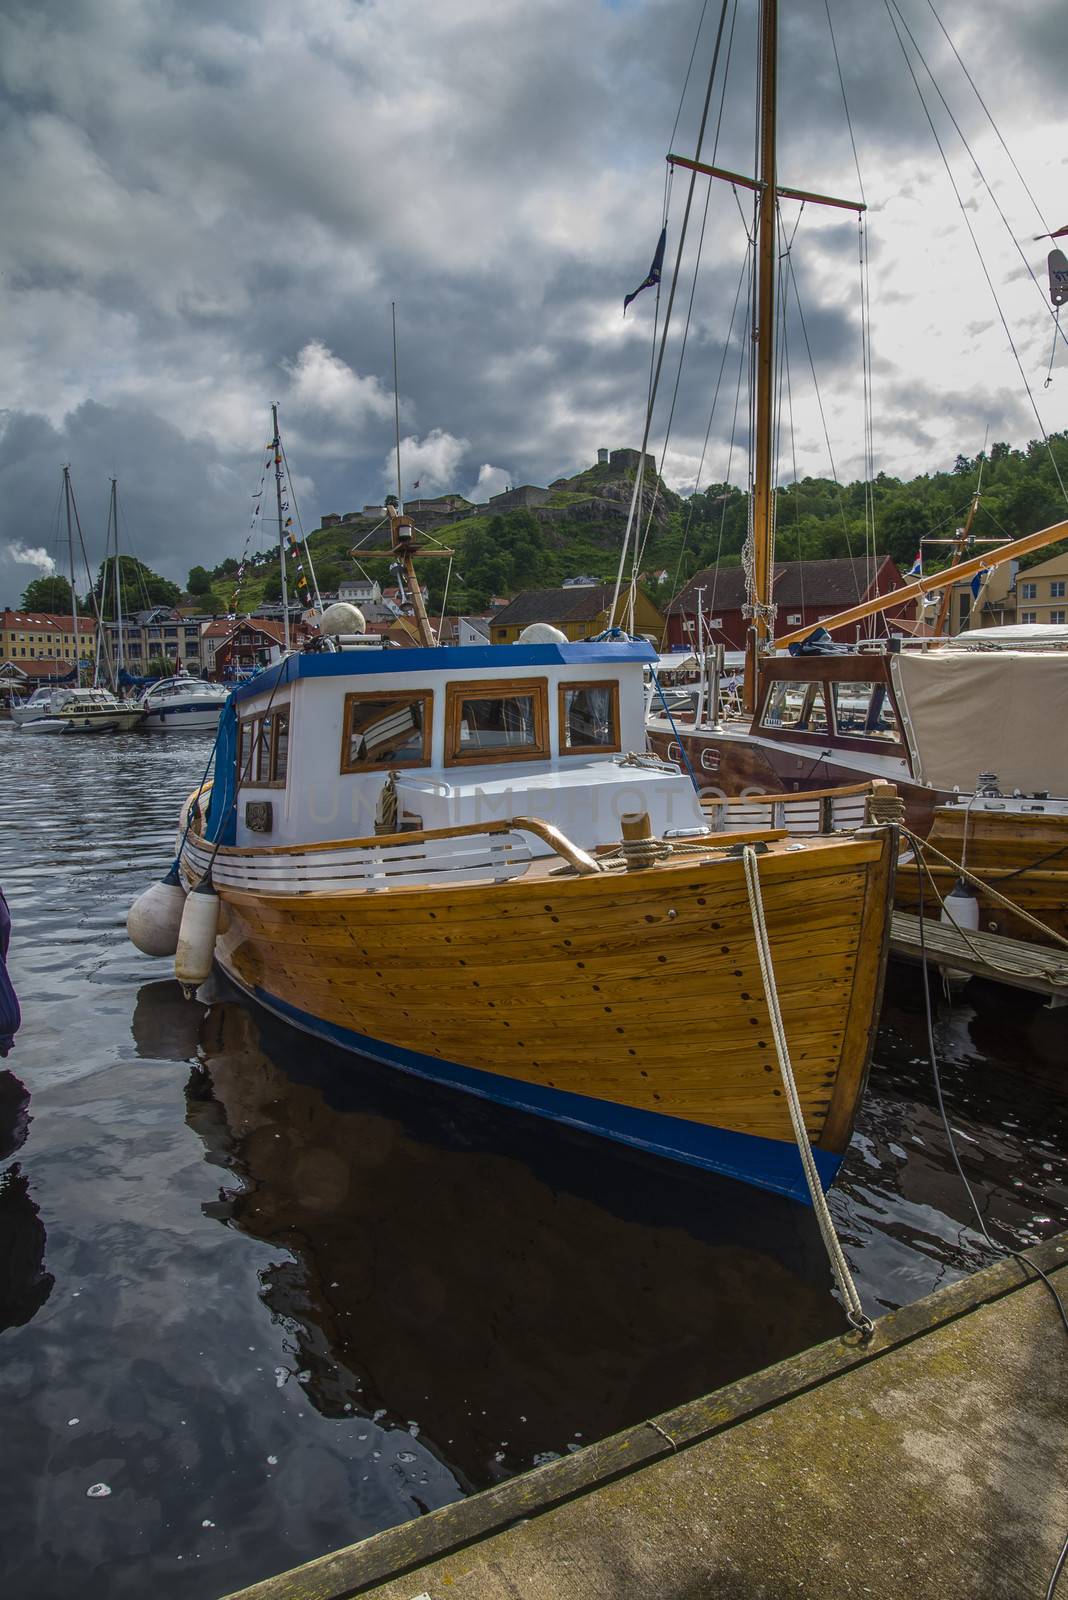 Exhibition of boats in the port of Halden, photo 8 by steirus